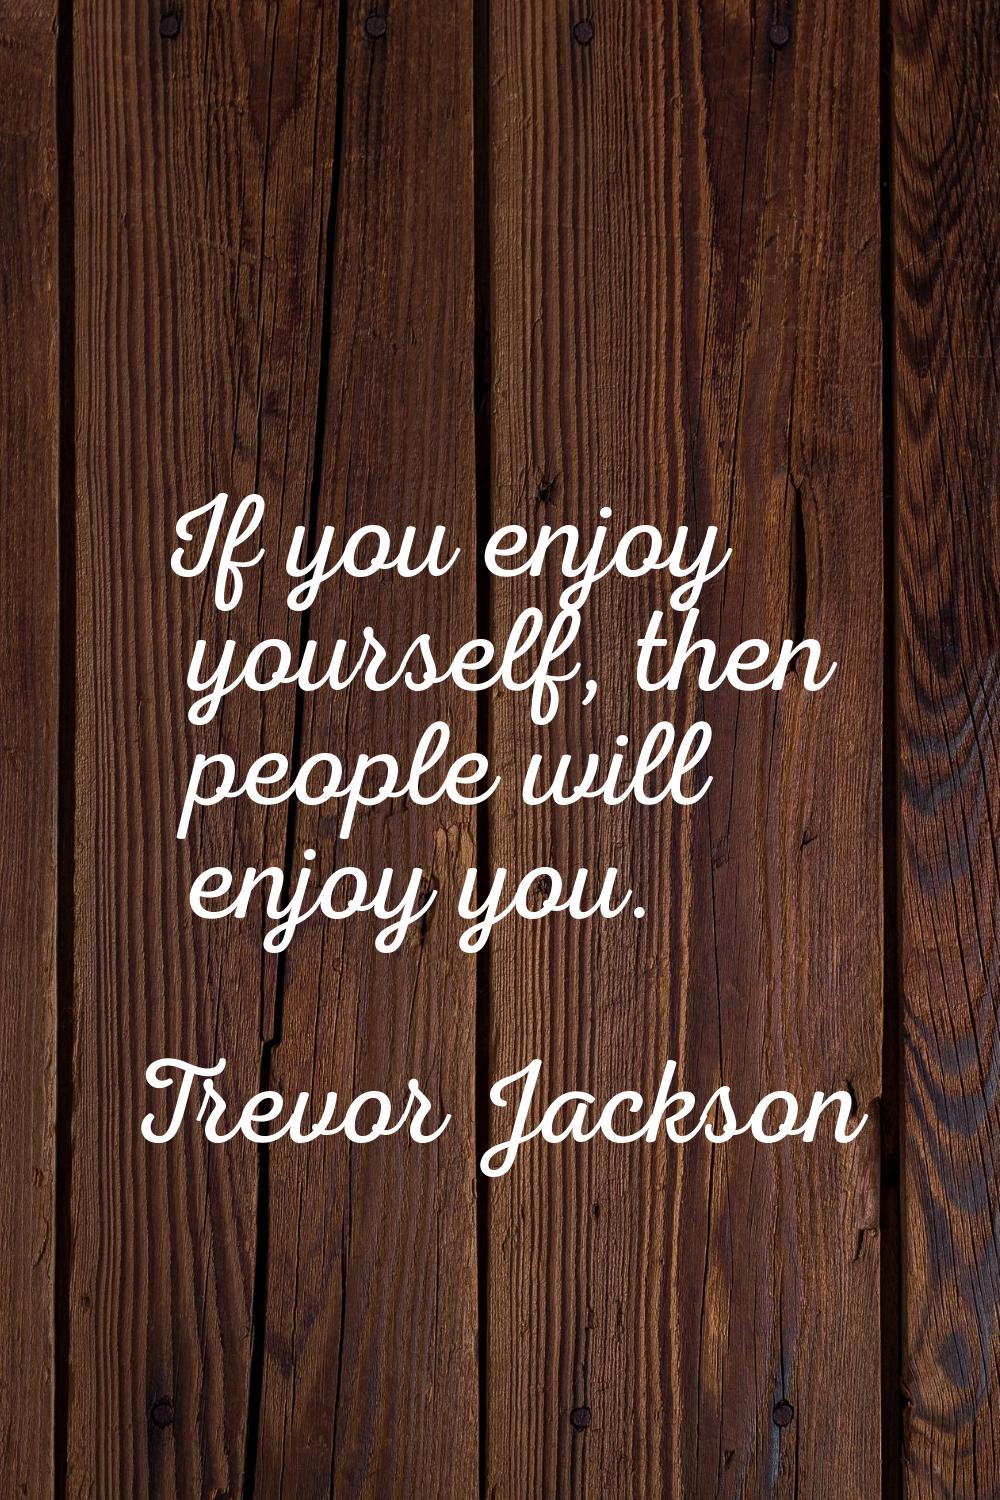 If you enjoy yourself, then people will enjoy you.